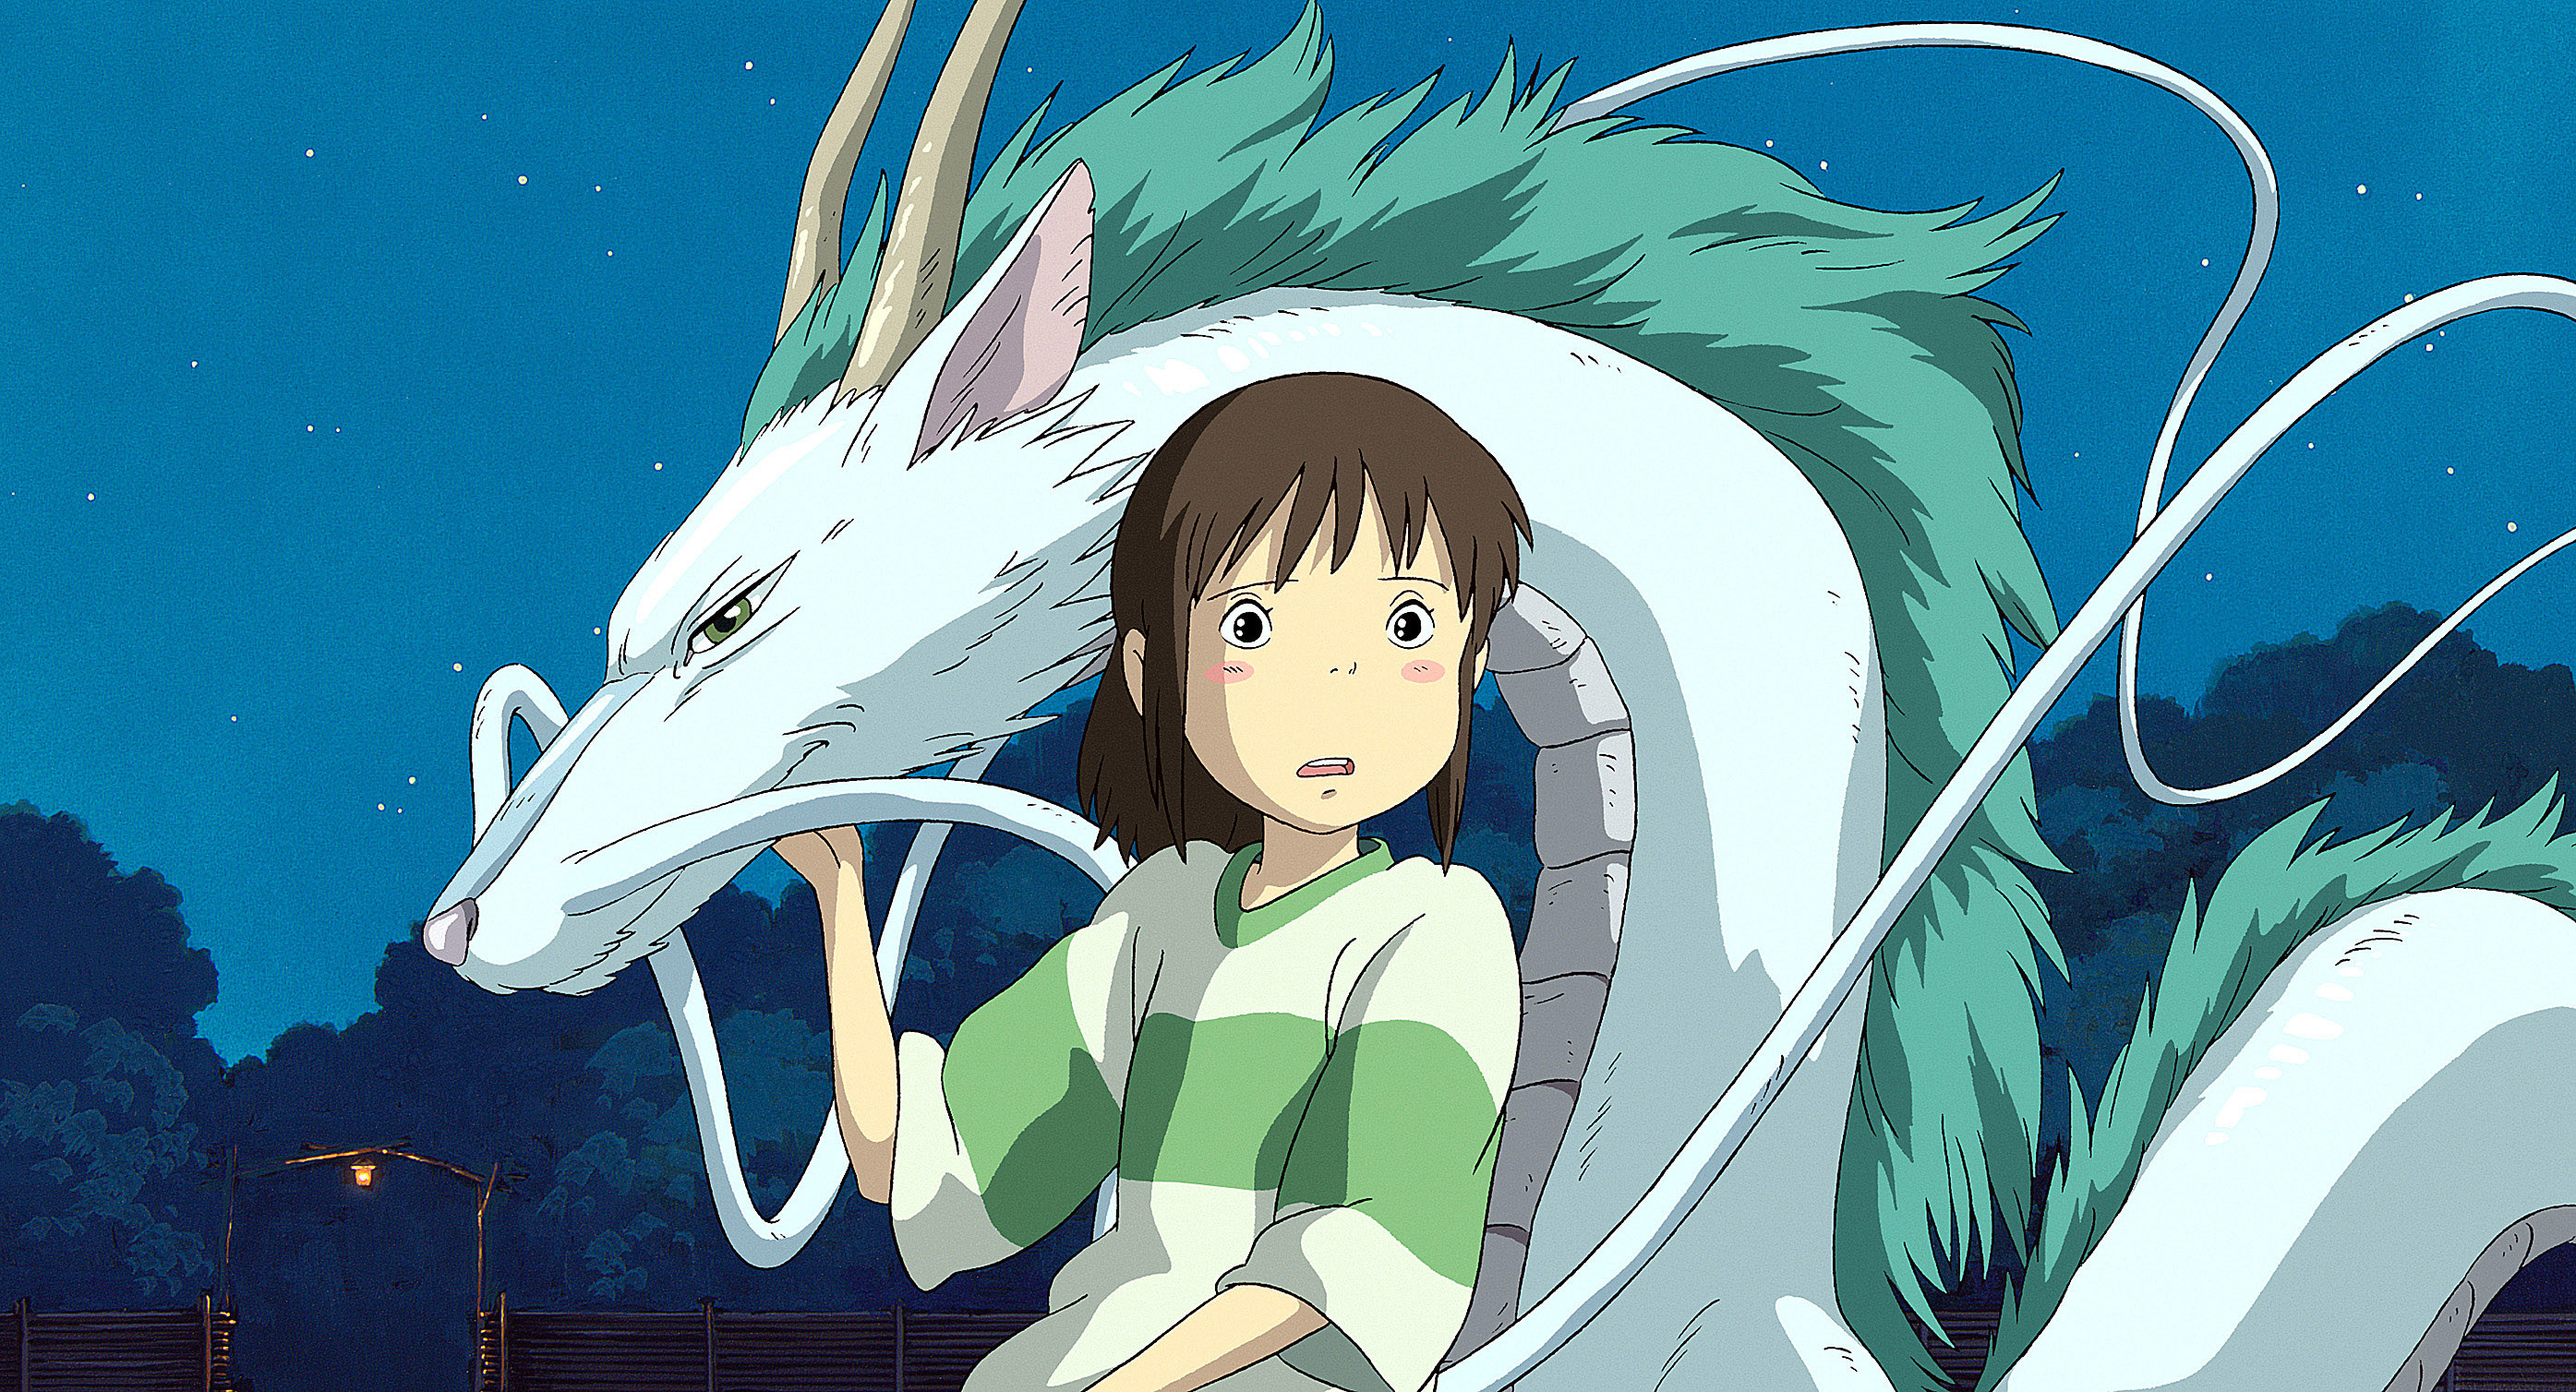 Chihiro looking worried while holding Haku in his white dragon form